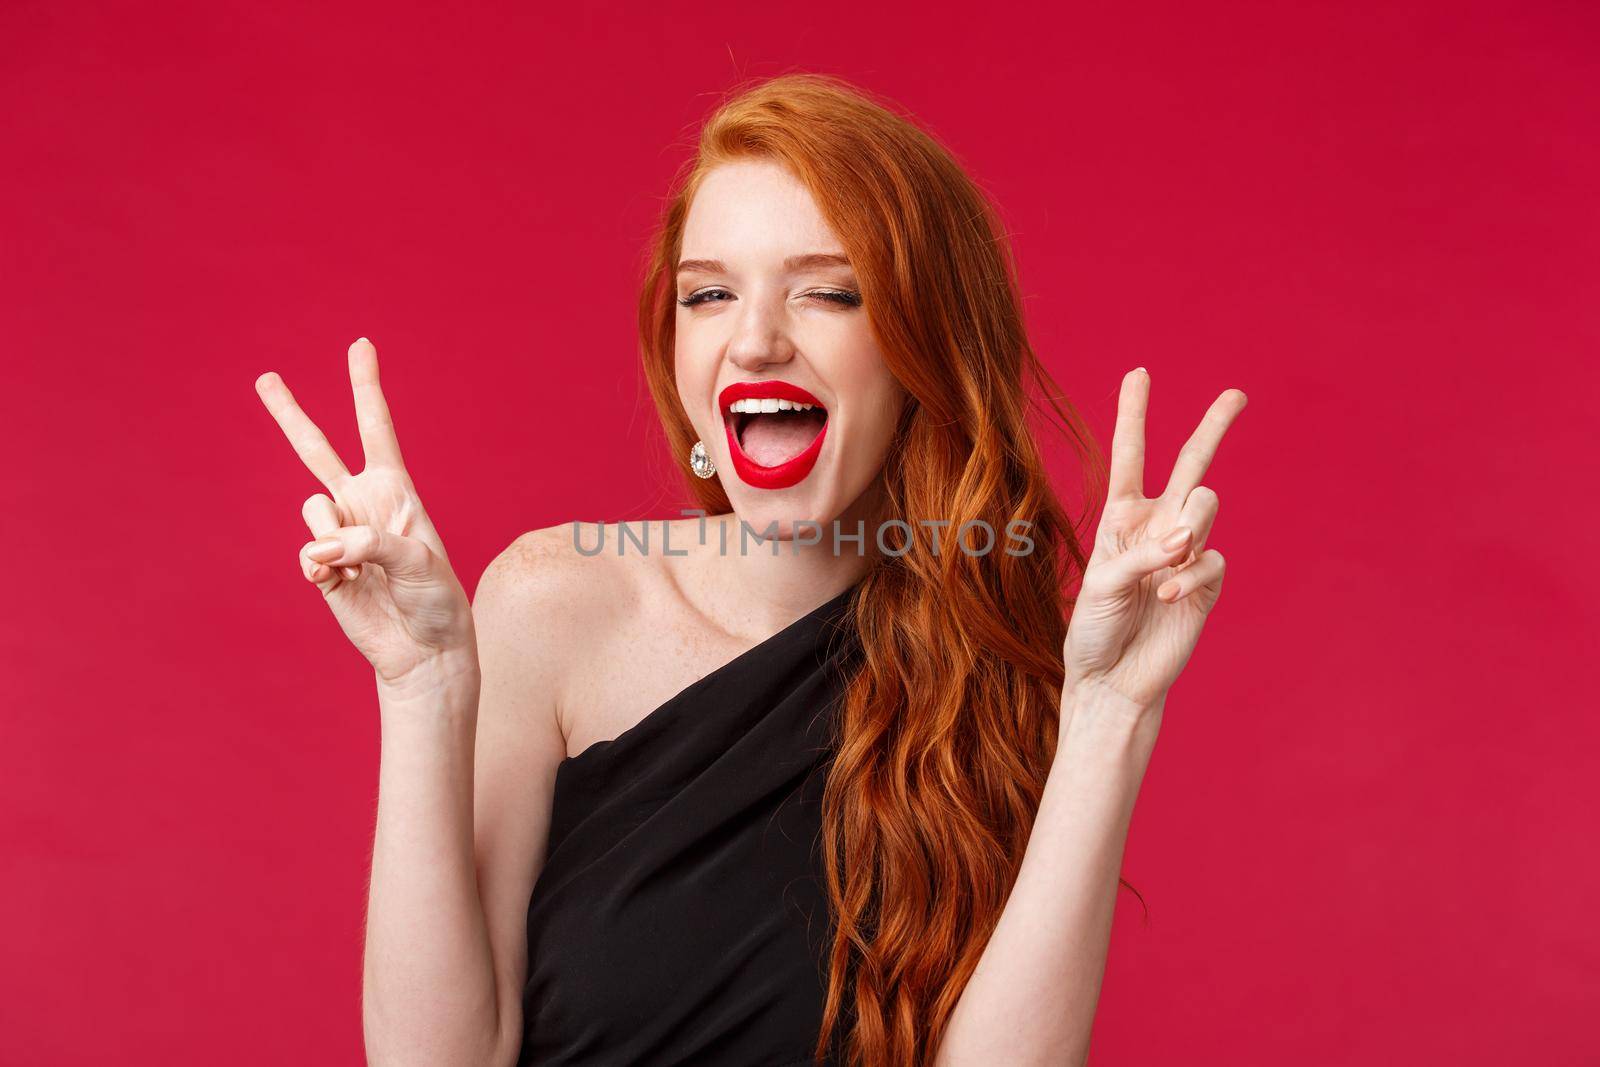 Close-up portrait of sassy and carefree redhead girl having fun, enjoying awesome party, show kawaii peace signs dancing joyfully, celebrating holiday in black dress and red lipstick.